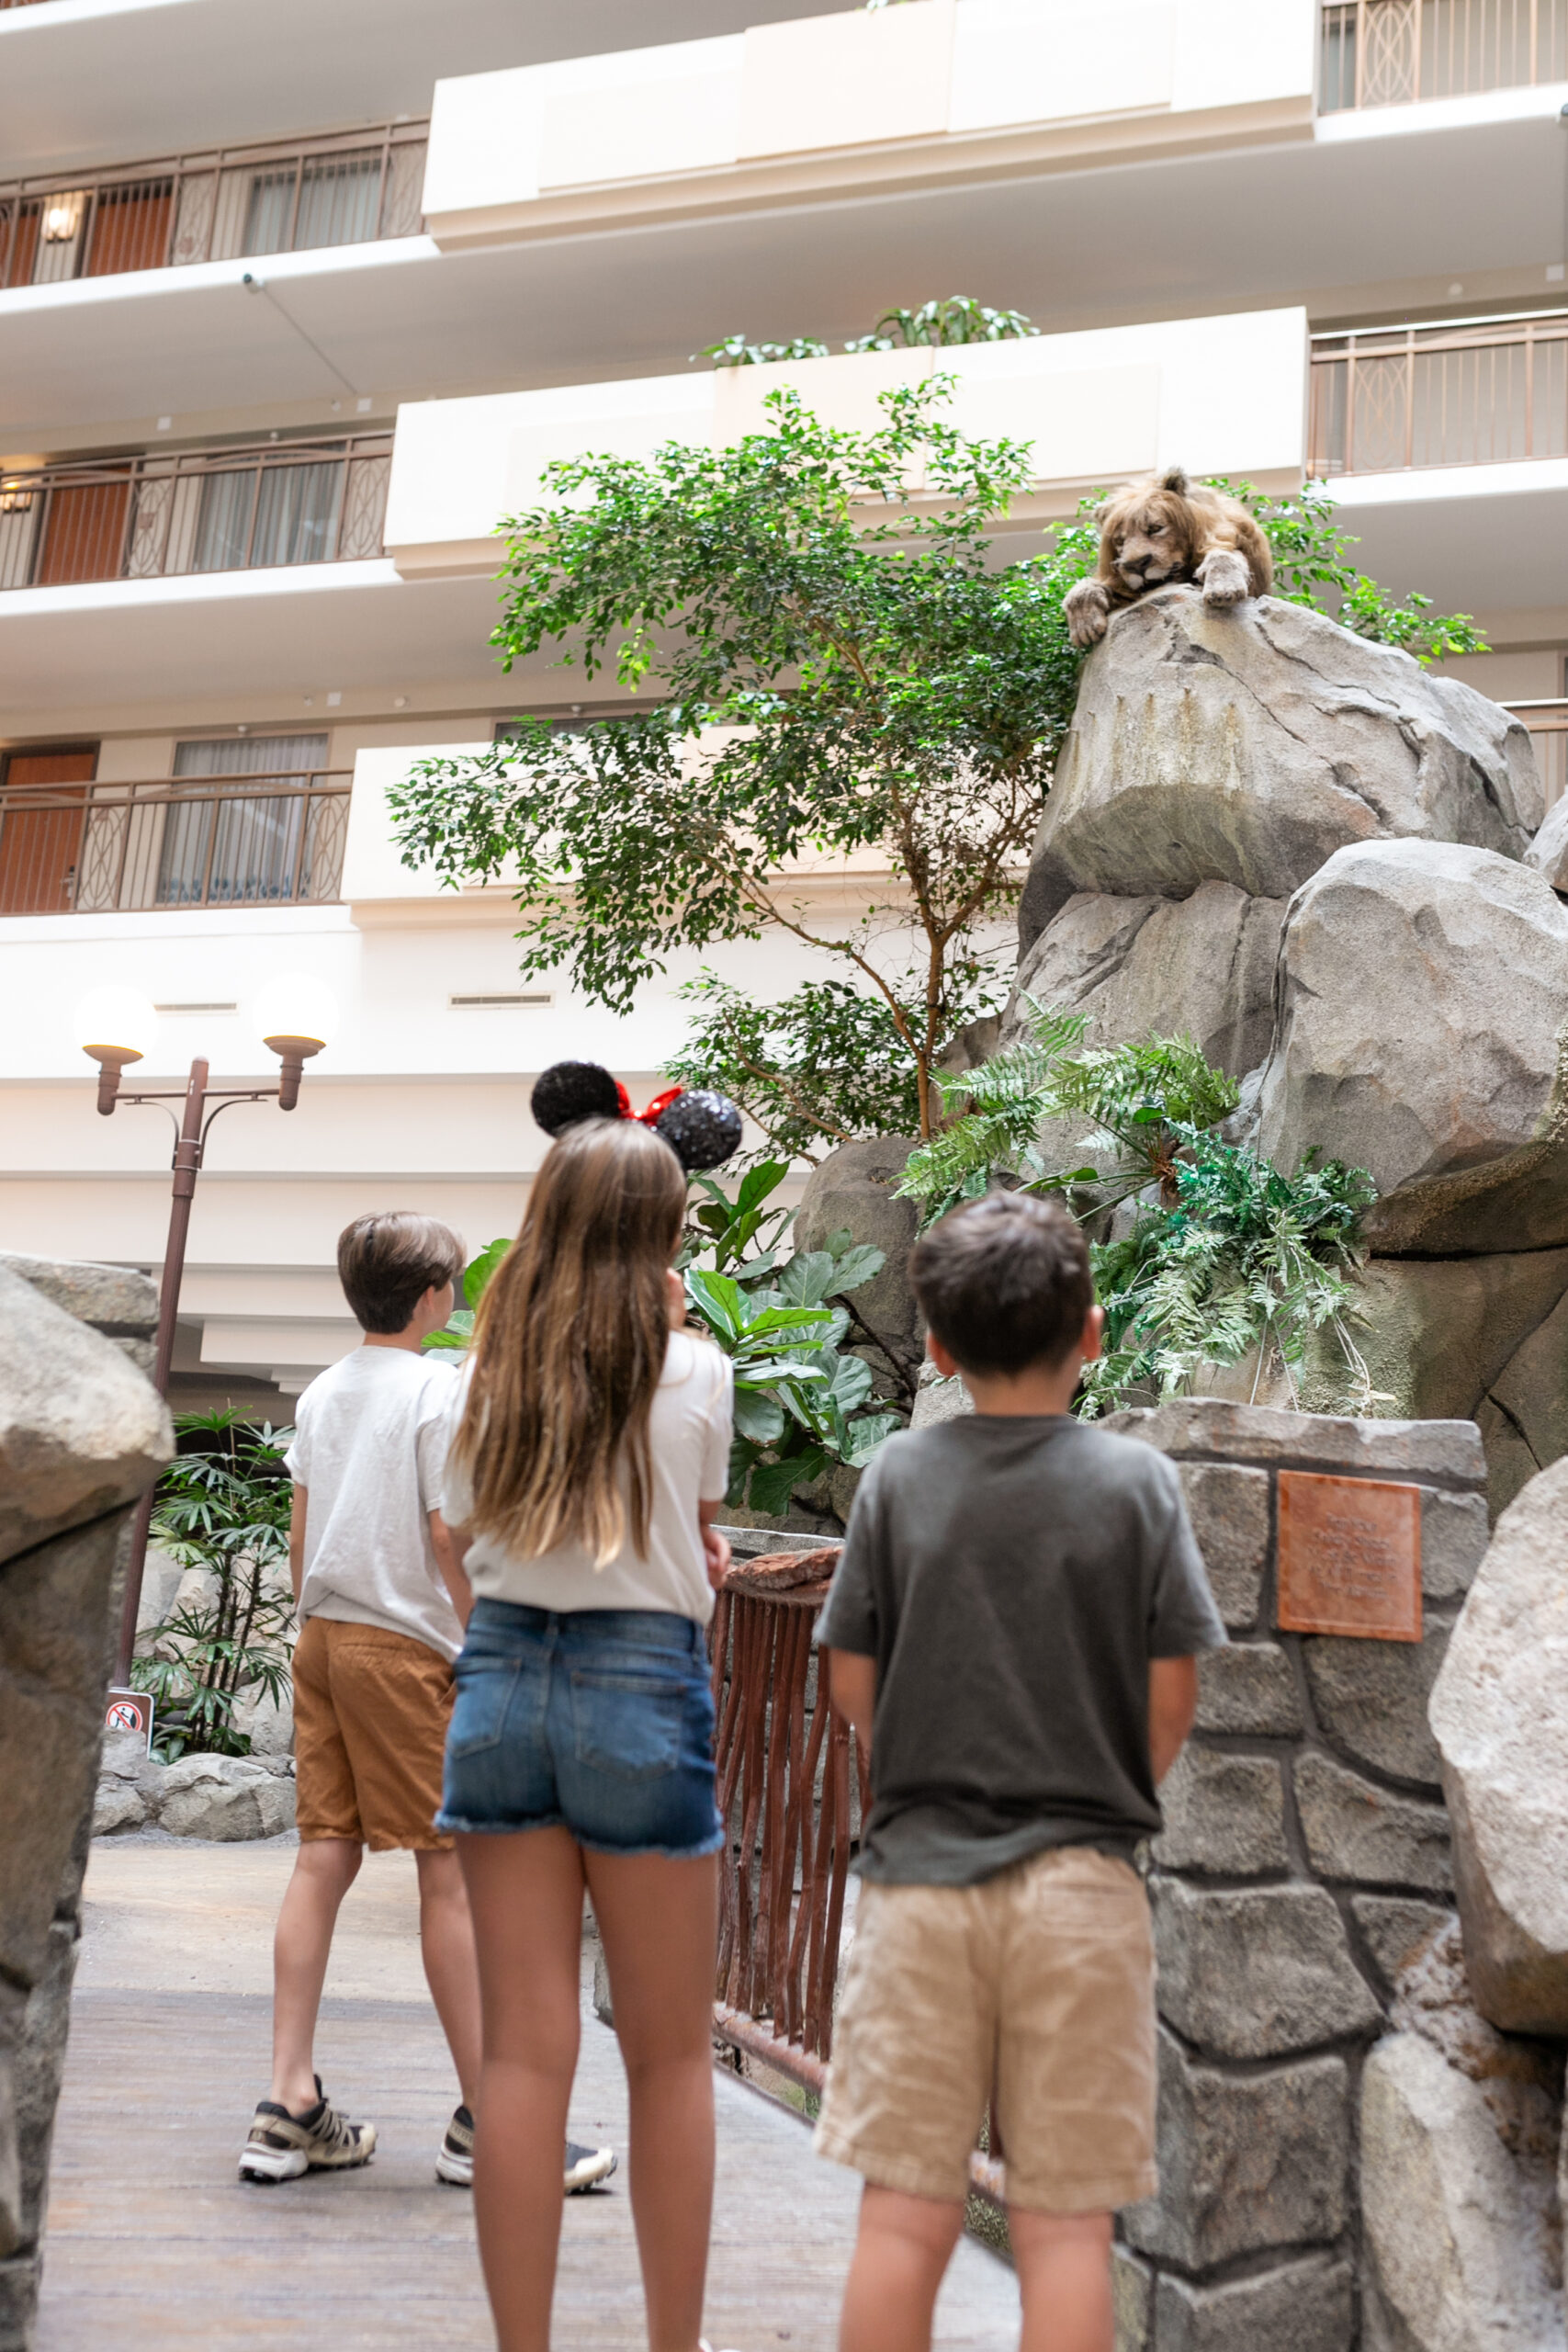 the atrium at the Embassy Suites Anaheim South has this fun jungle theme with a lion that roars every hour or so